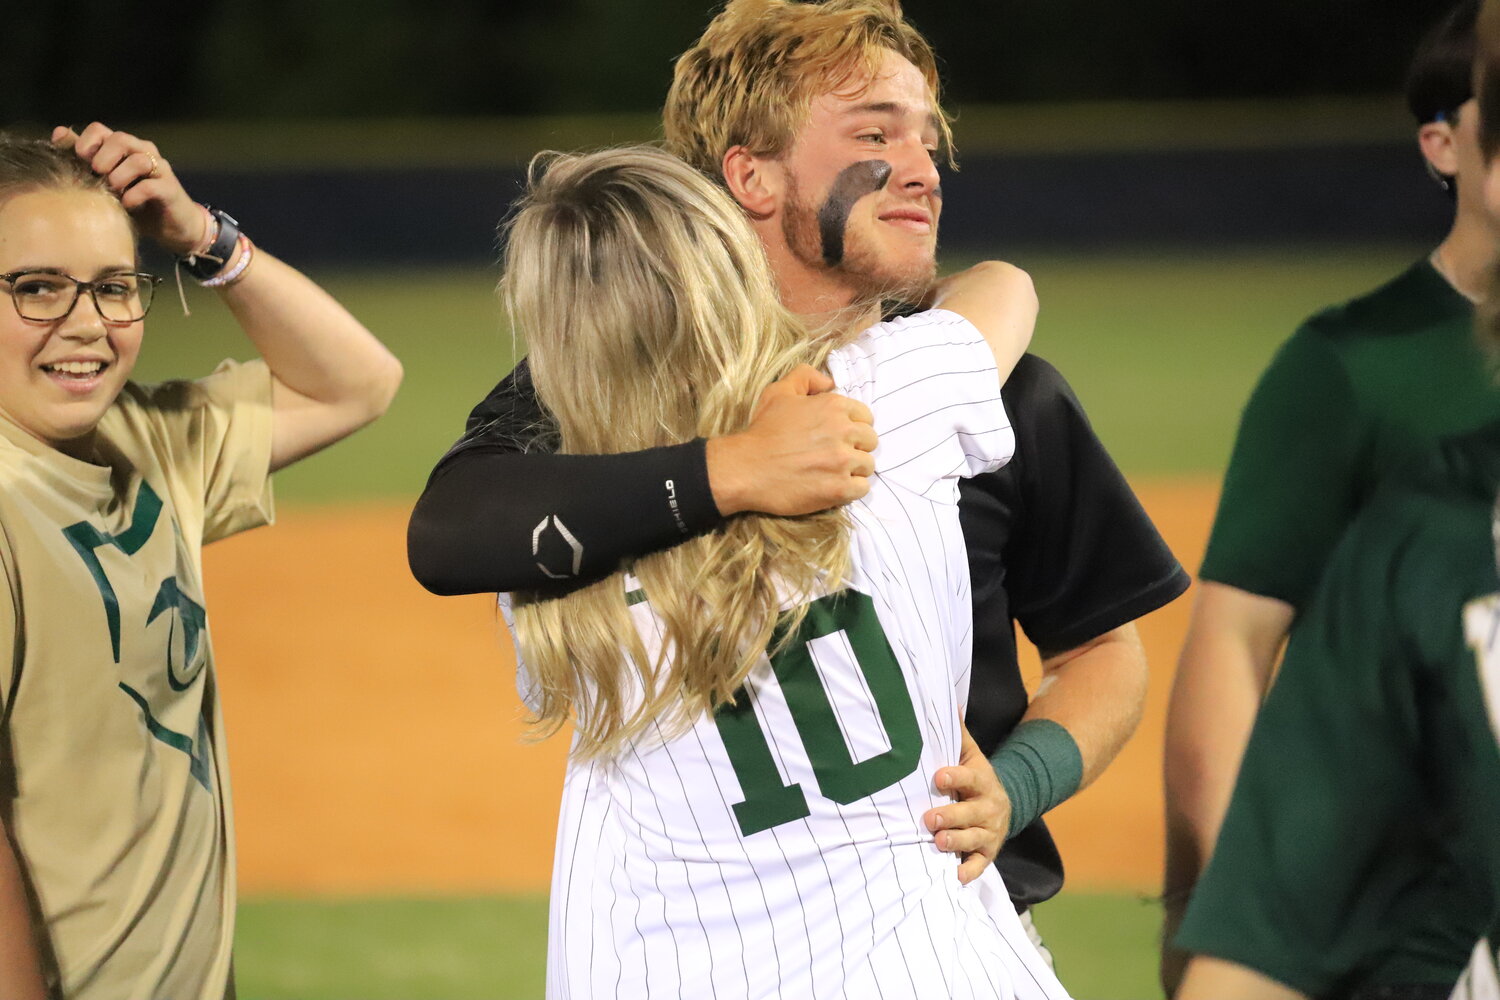 Weston Grant celebrates River Bluff's state championship. Grant scored the go-ahead run in the top of the seventh of the team's 9-7 victory.